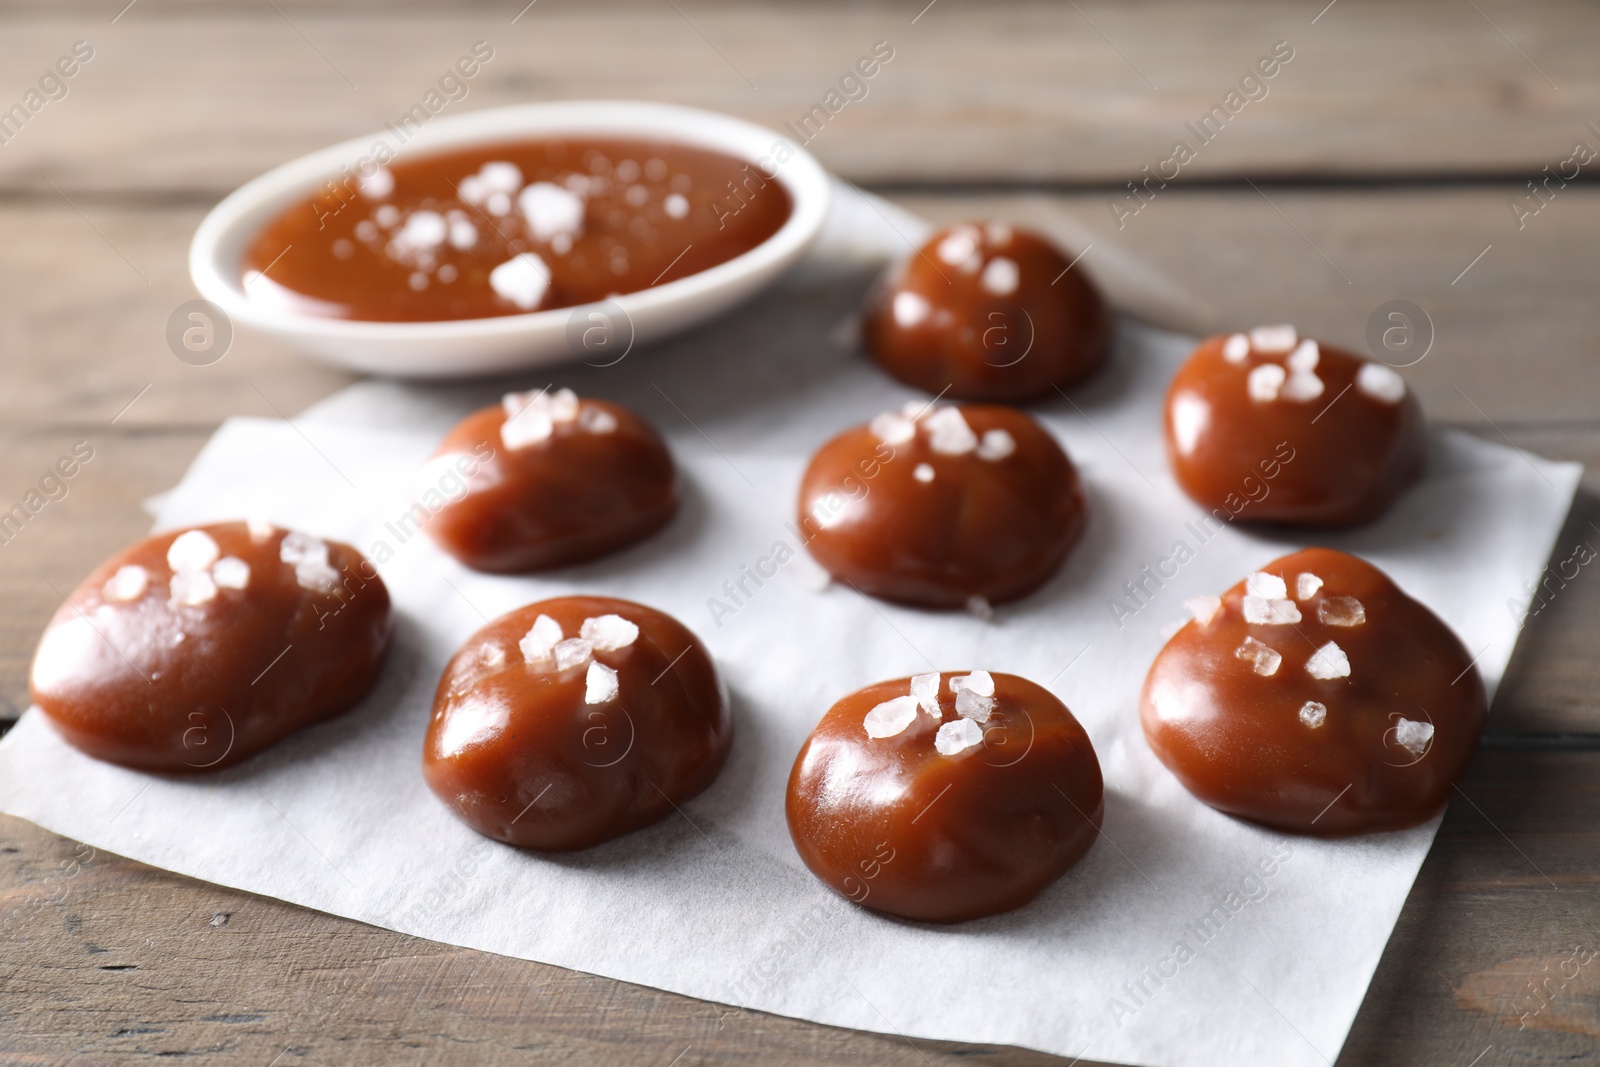 Photo of Tasty candies, caramel sauce and salt on wooden table